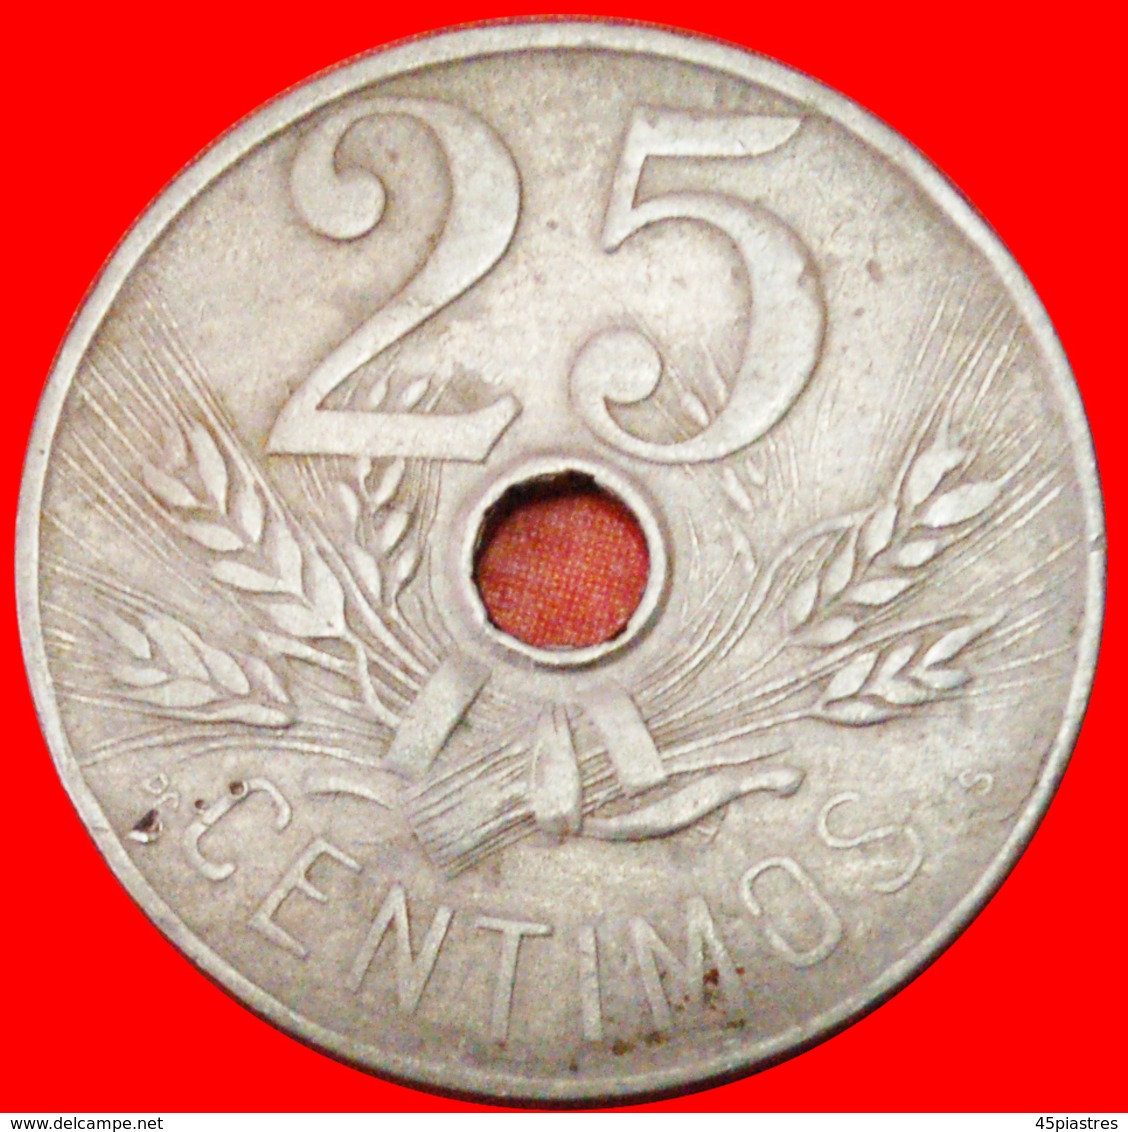 # HAMMER: SPAIN ★ 25 CENTIMOS 1927! LOW START ★ NO RESERVE! Alfonso XIII (1886-1931) - Essays & New Minting